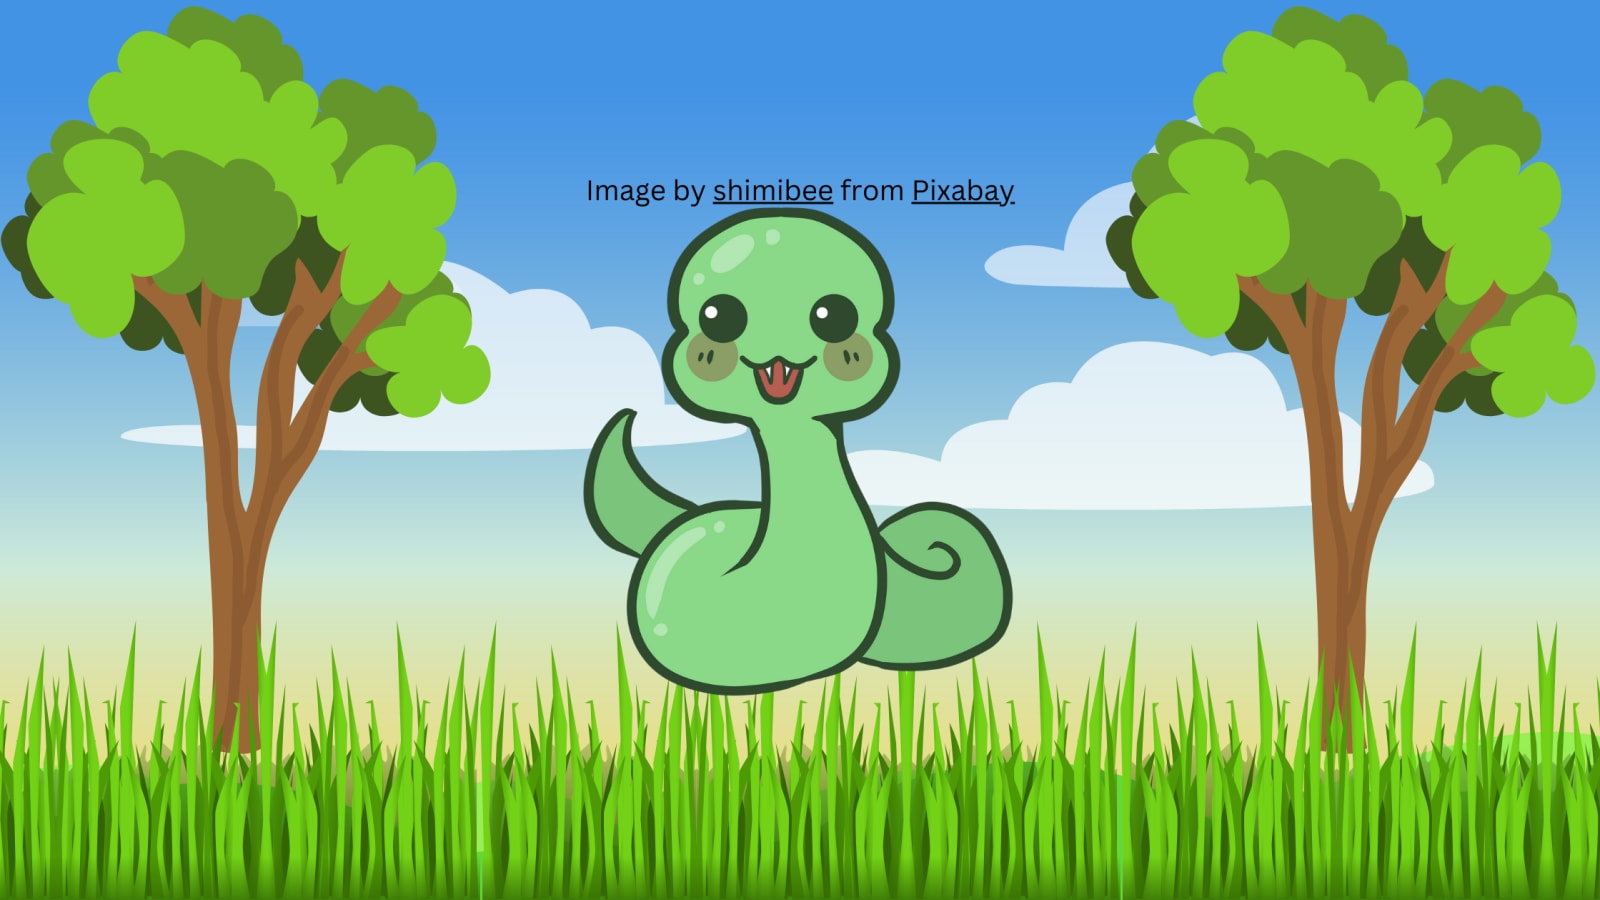 Create a snake game using HTML, CSS and JavaScript - GeeksforGeeks